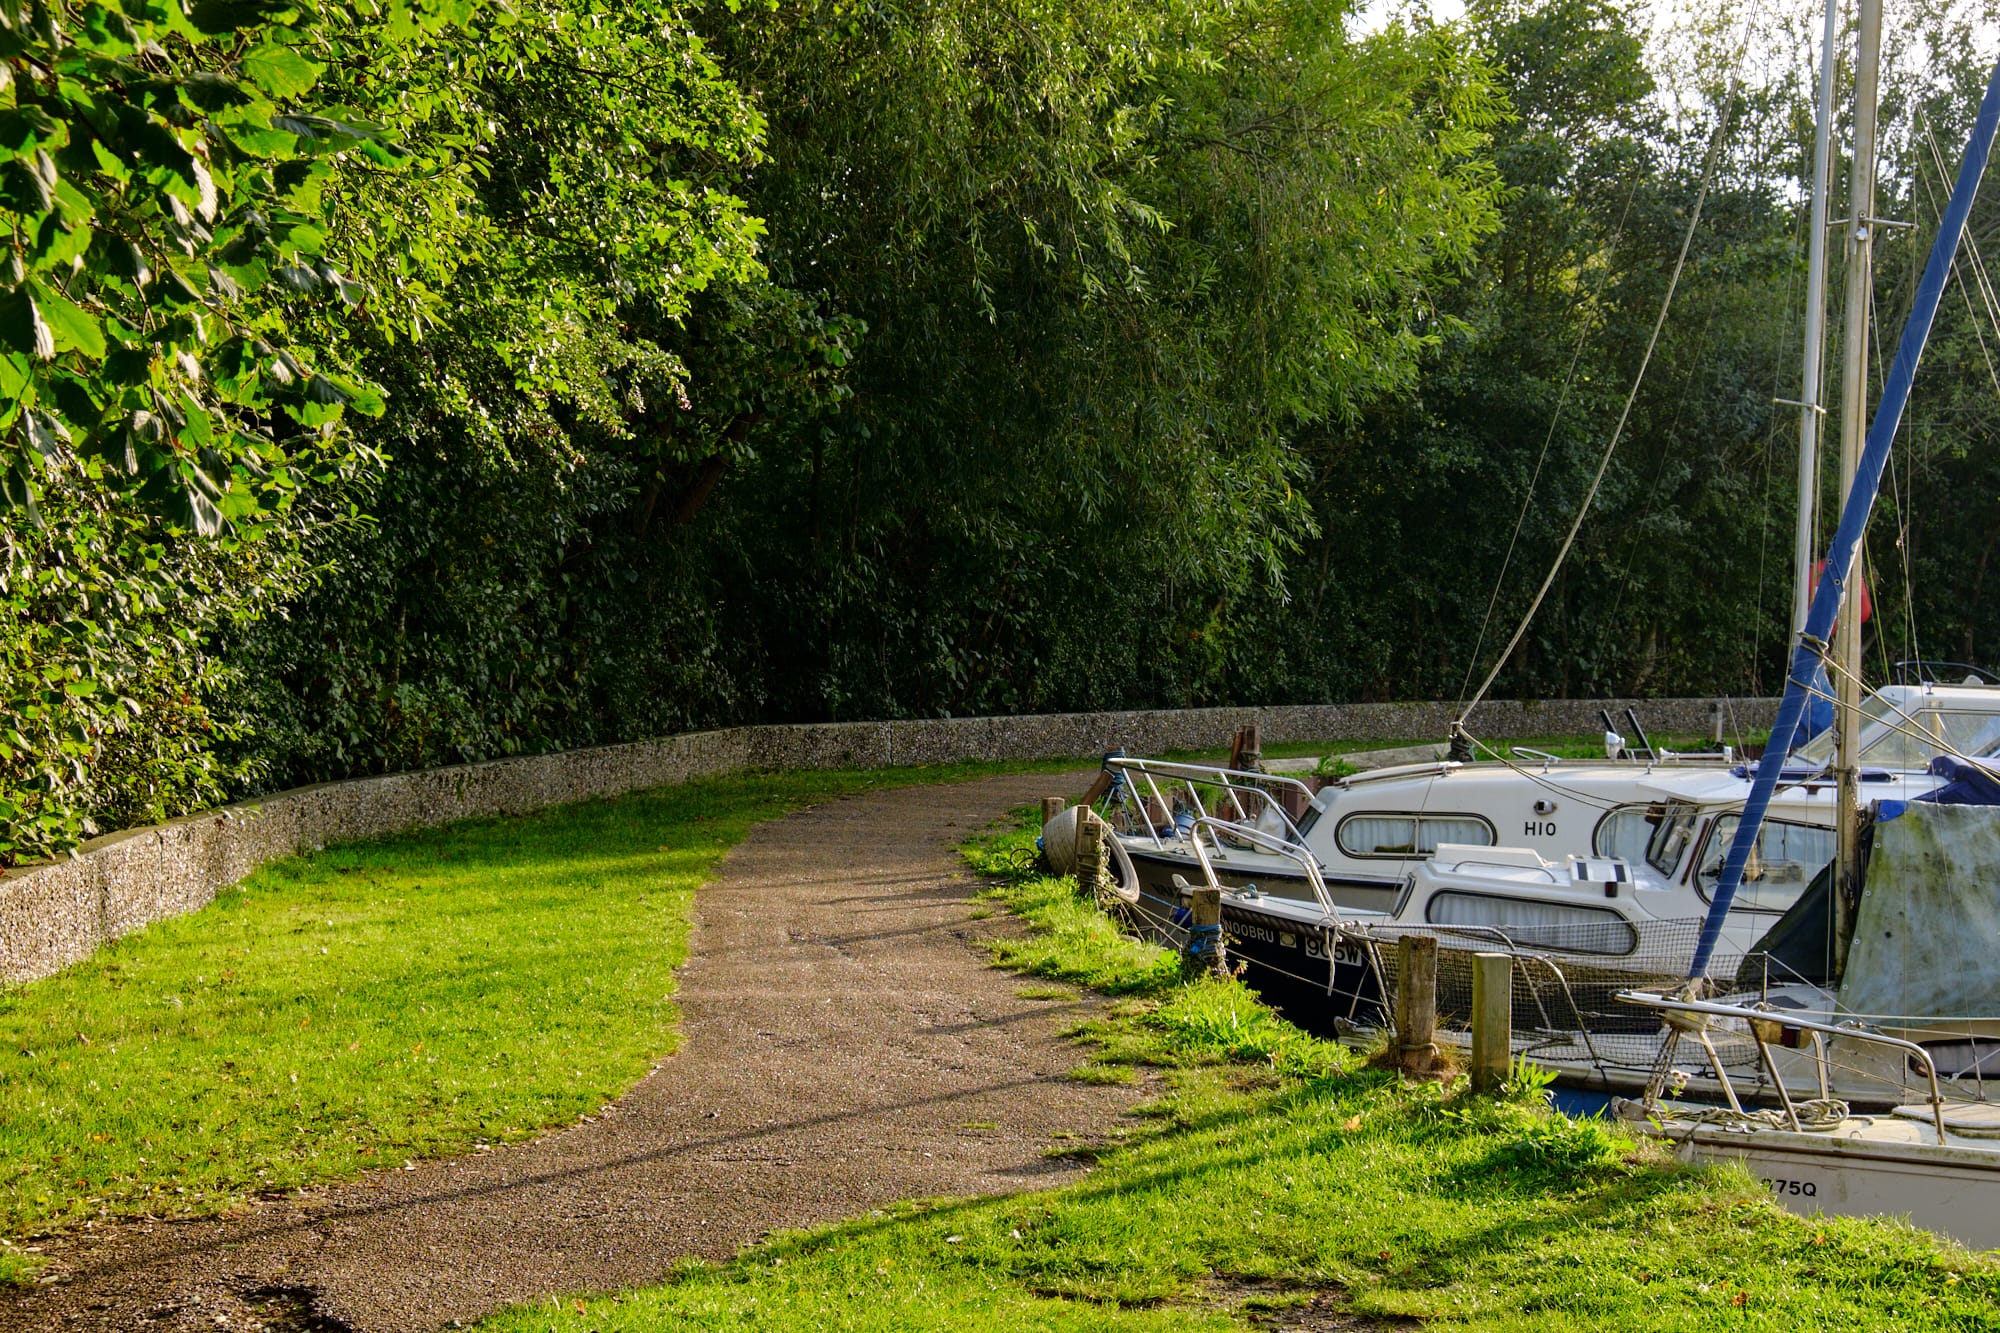 footpath around berthed boats